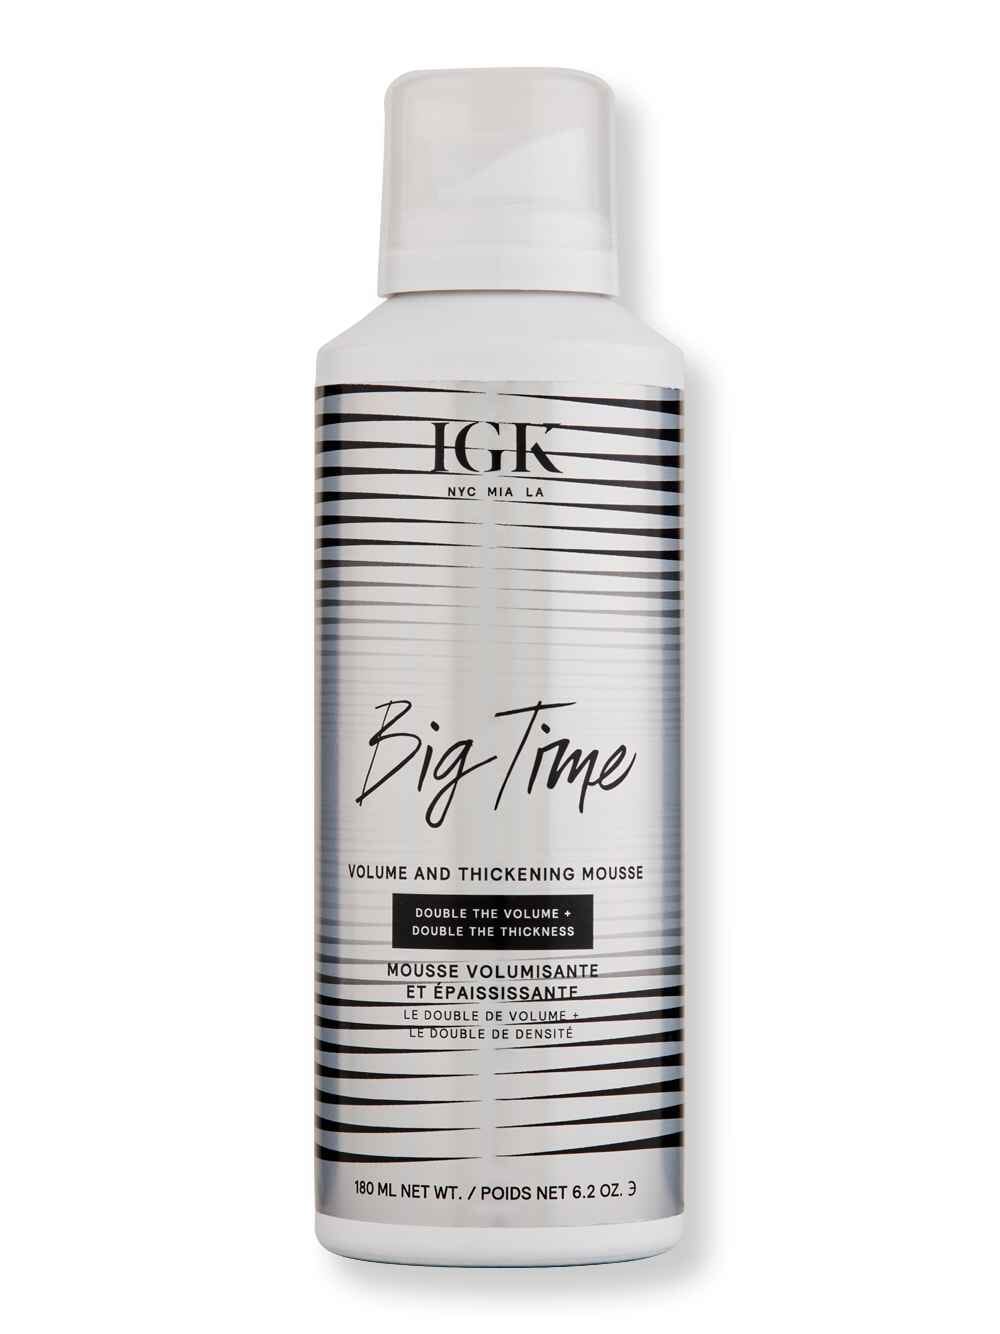 iGK iGK Big Time Volume + Thickening Mousse 6.2 oz Mousses & Foams 